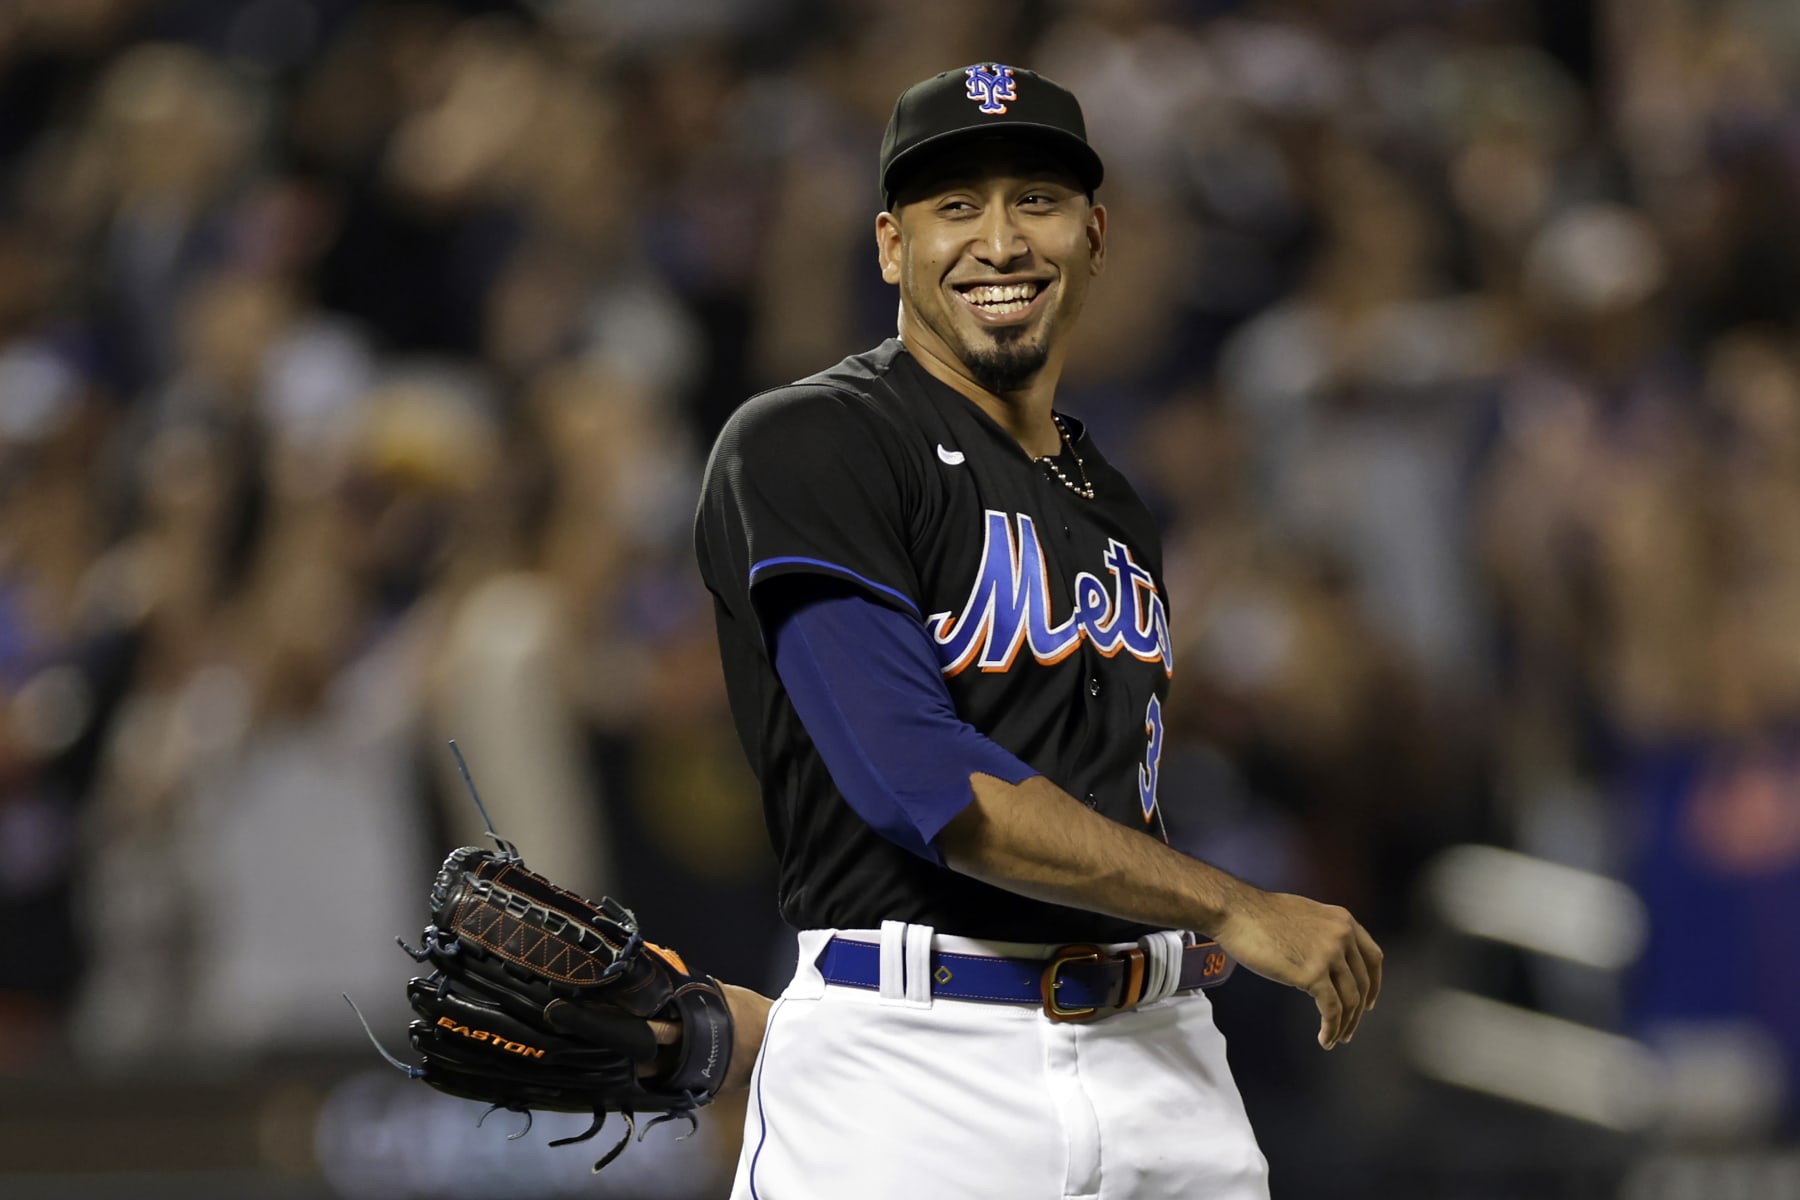 NY Mets closer Edwin Diaz pitching toward a $100 million contract